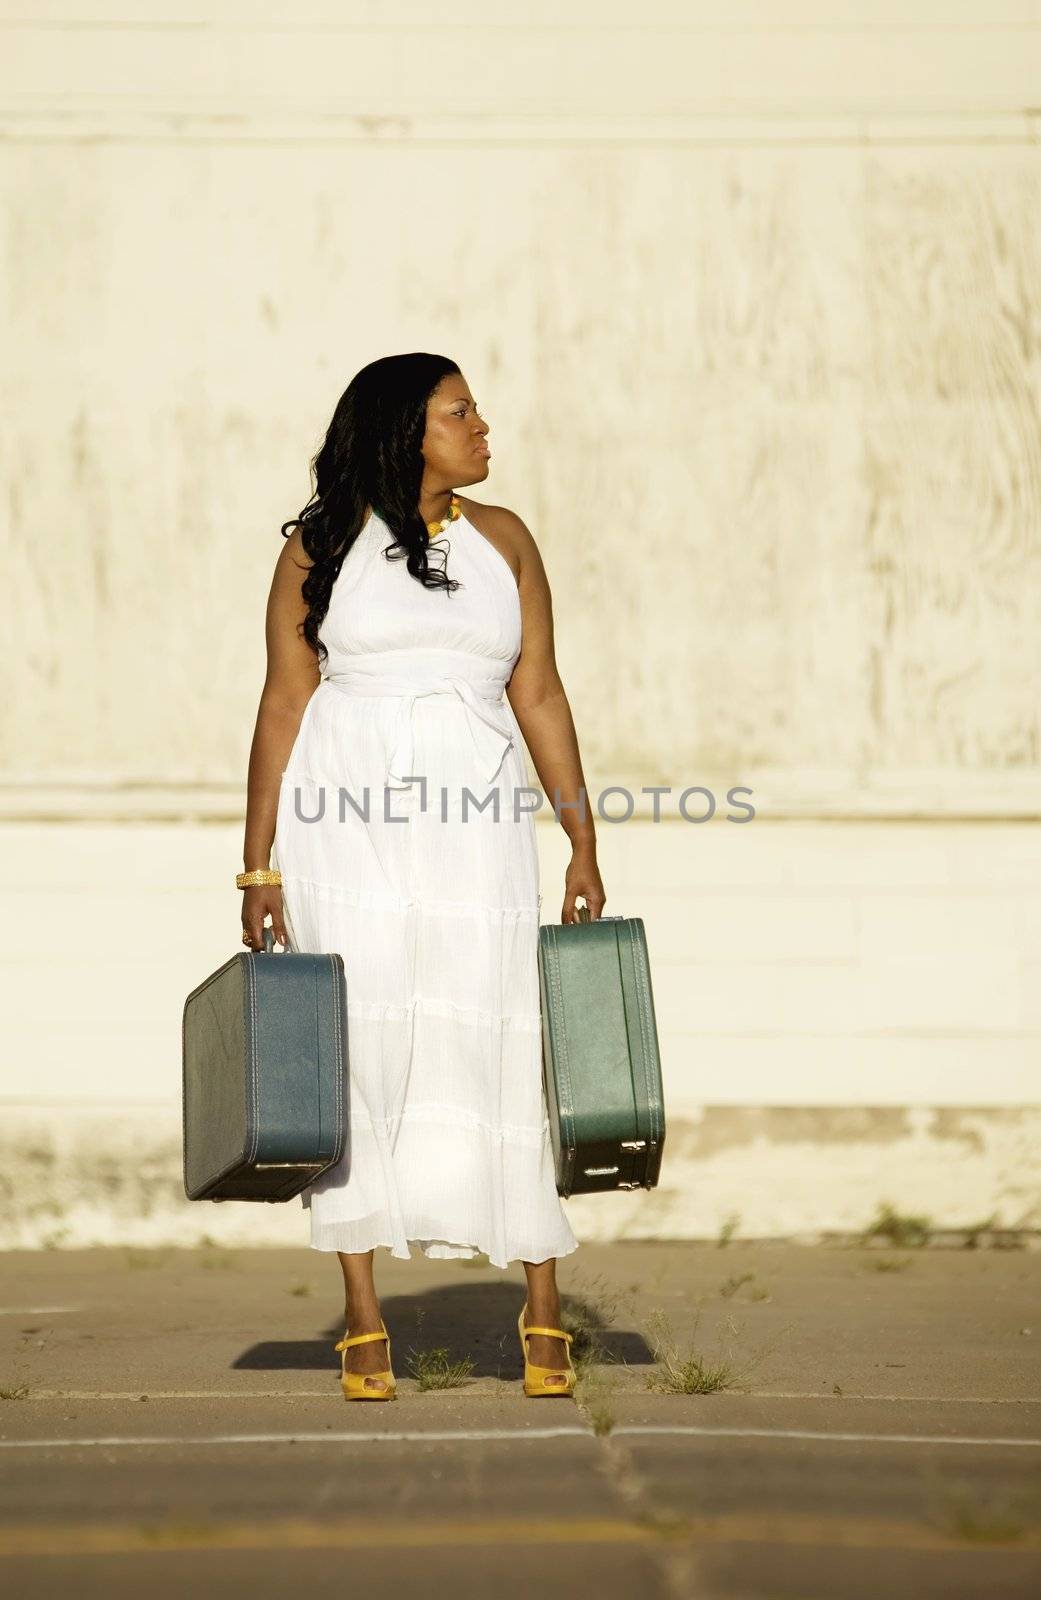 African American woman with suitcases waiting by the street for someone to arrive.